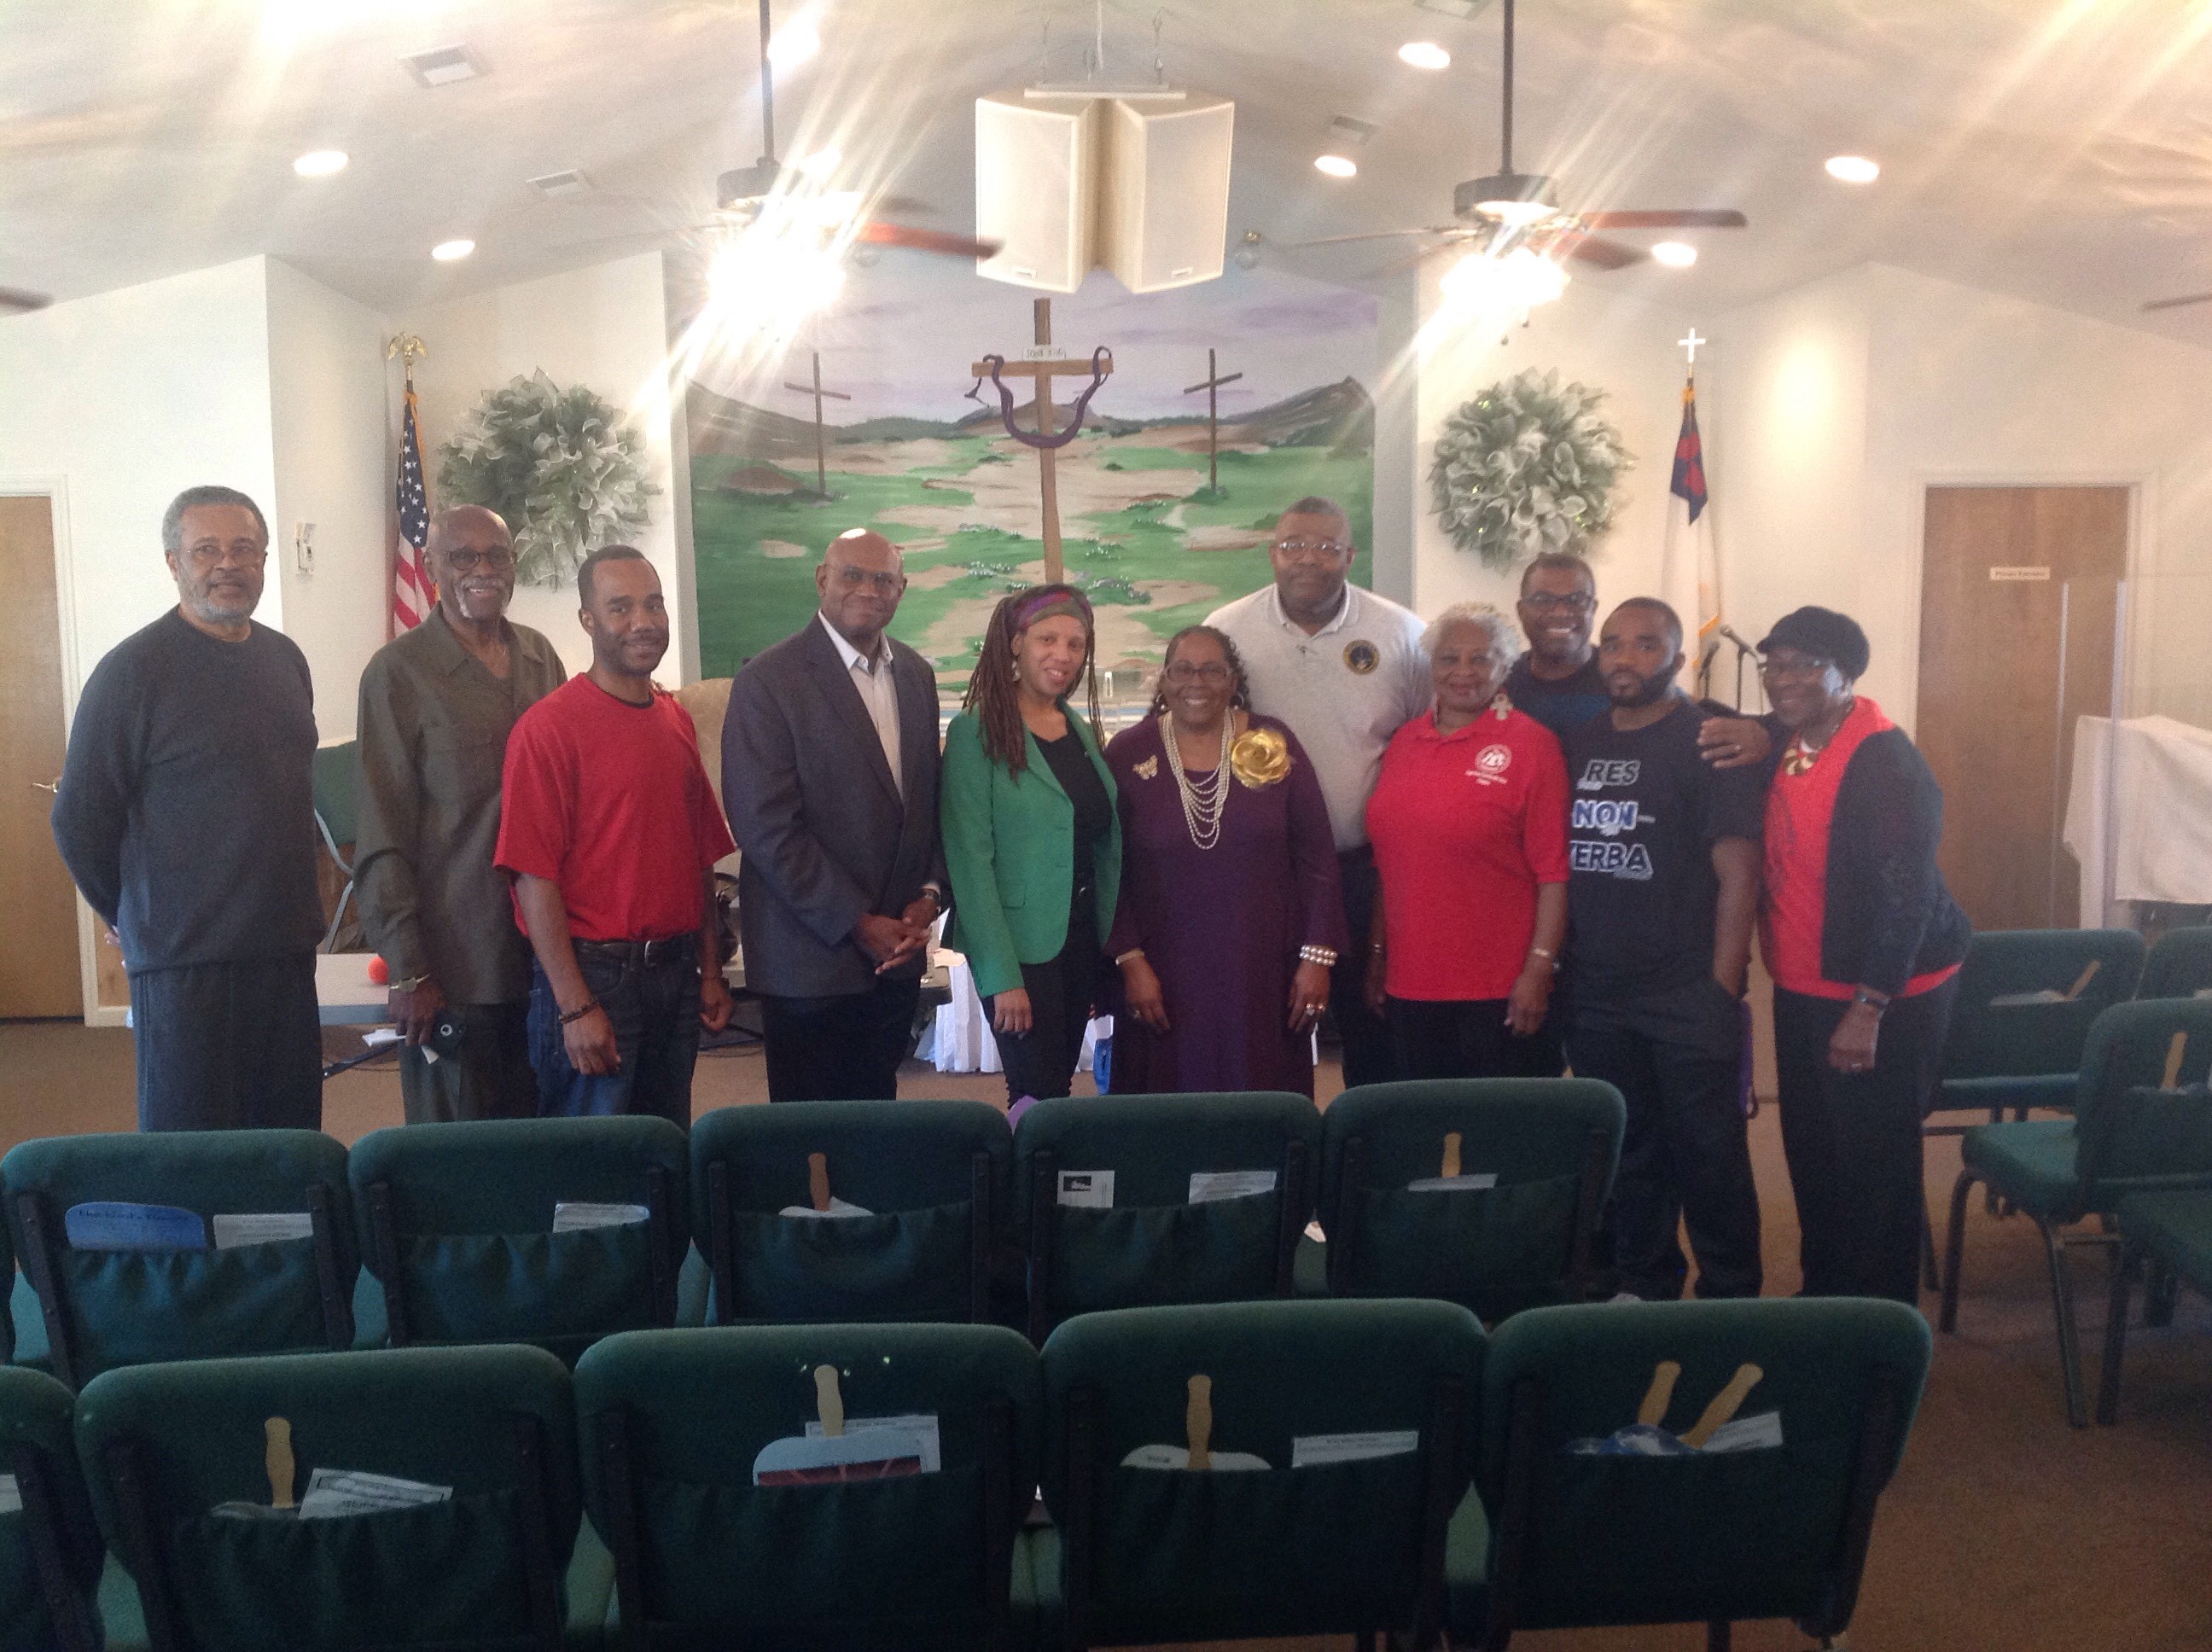 Members of the National Association of Black Social Workers pose for a photo on their day of service.